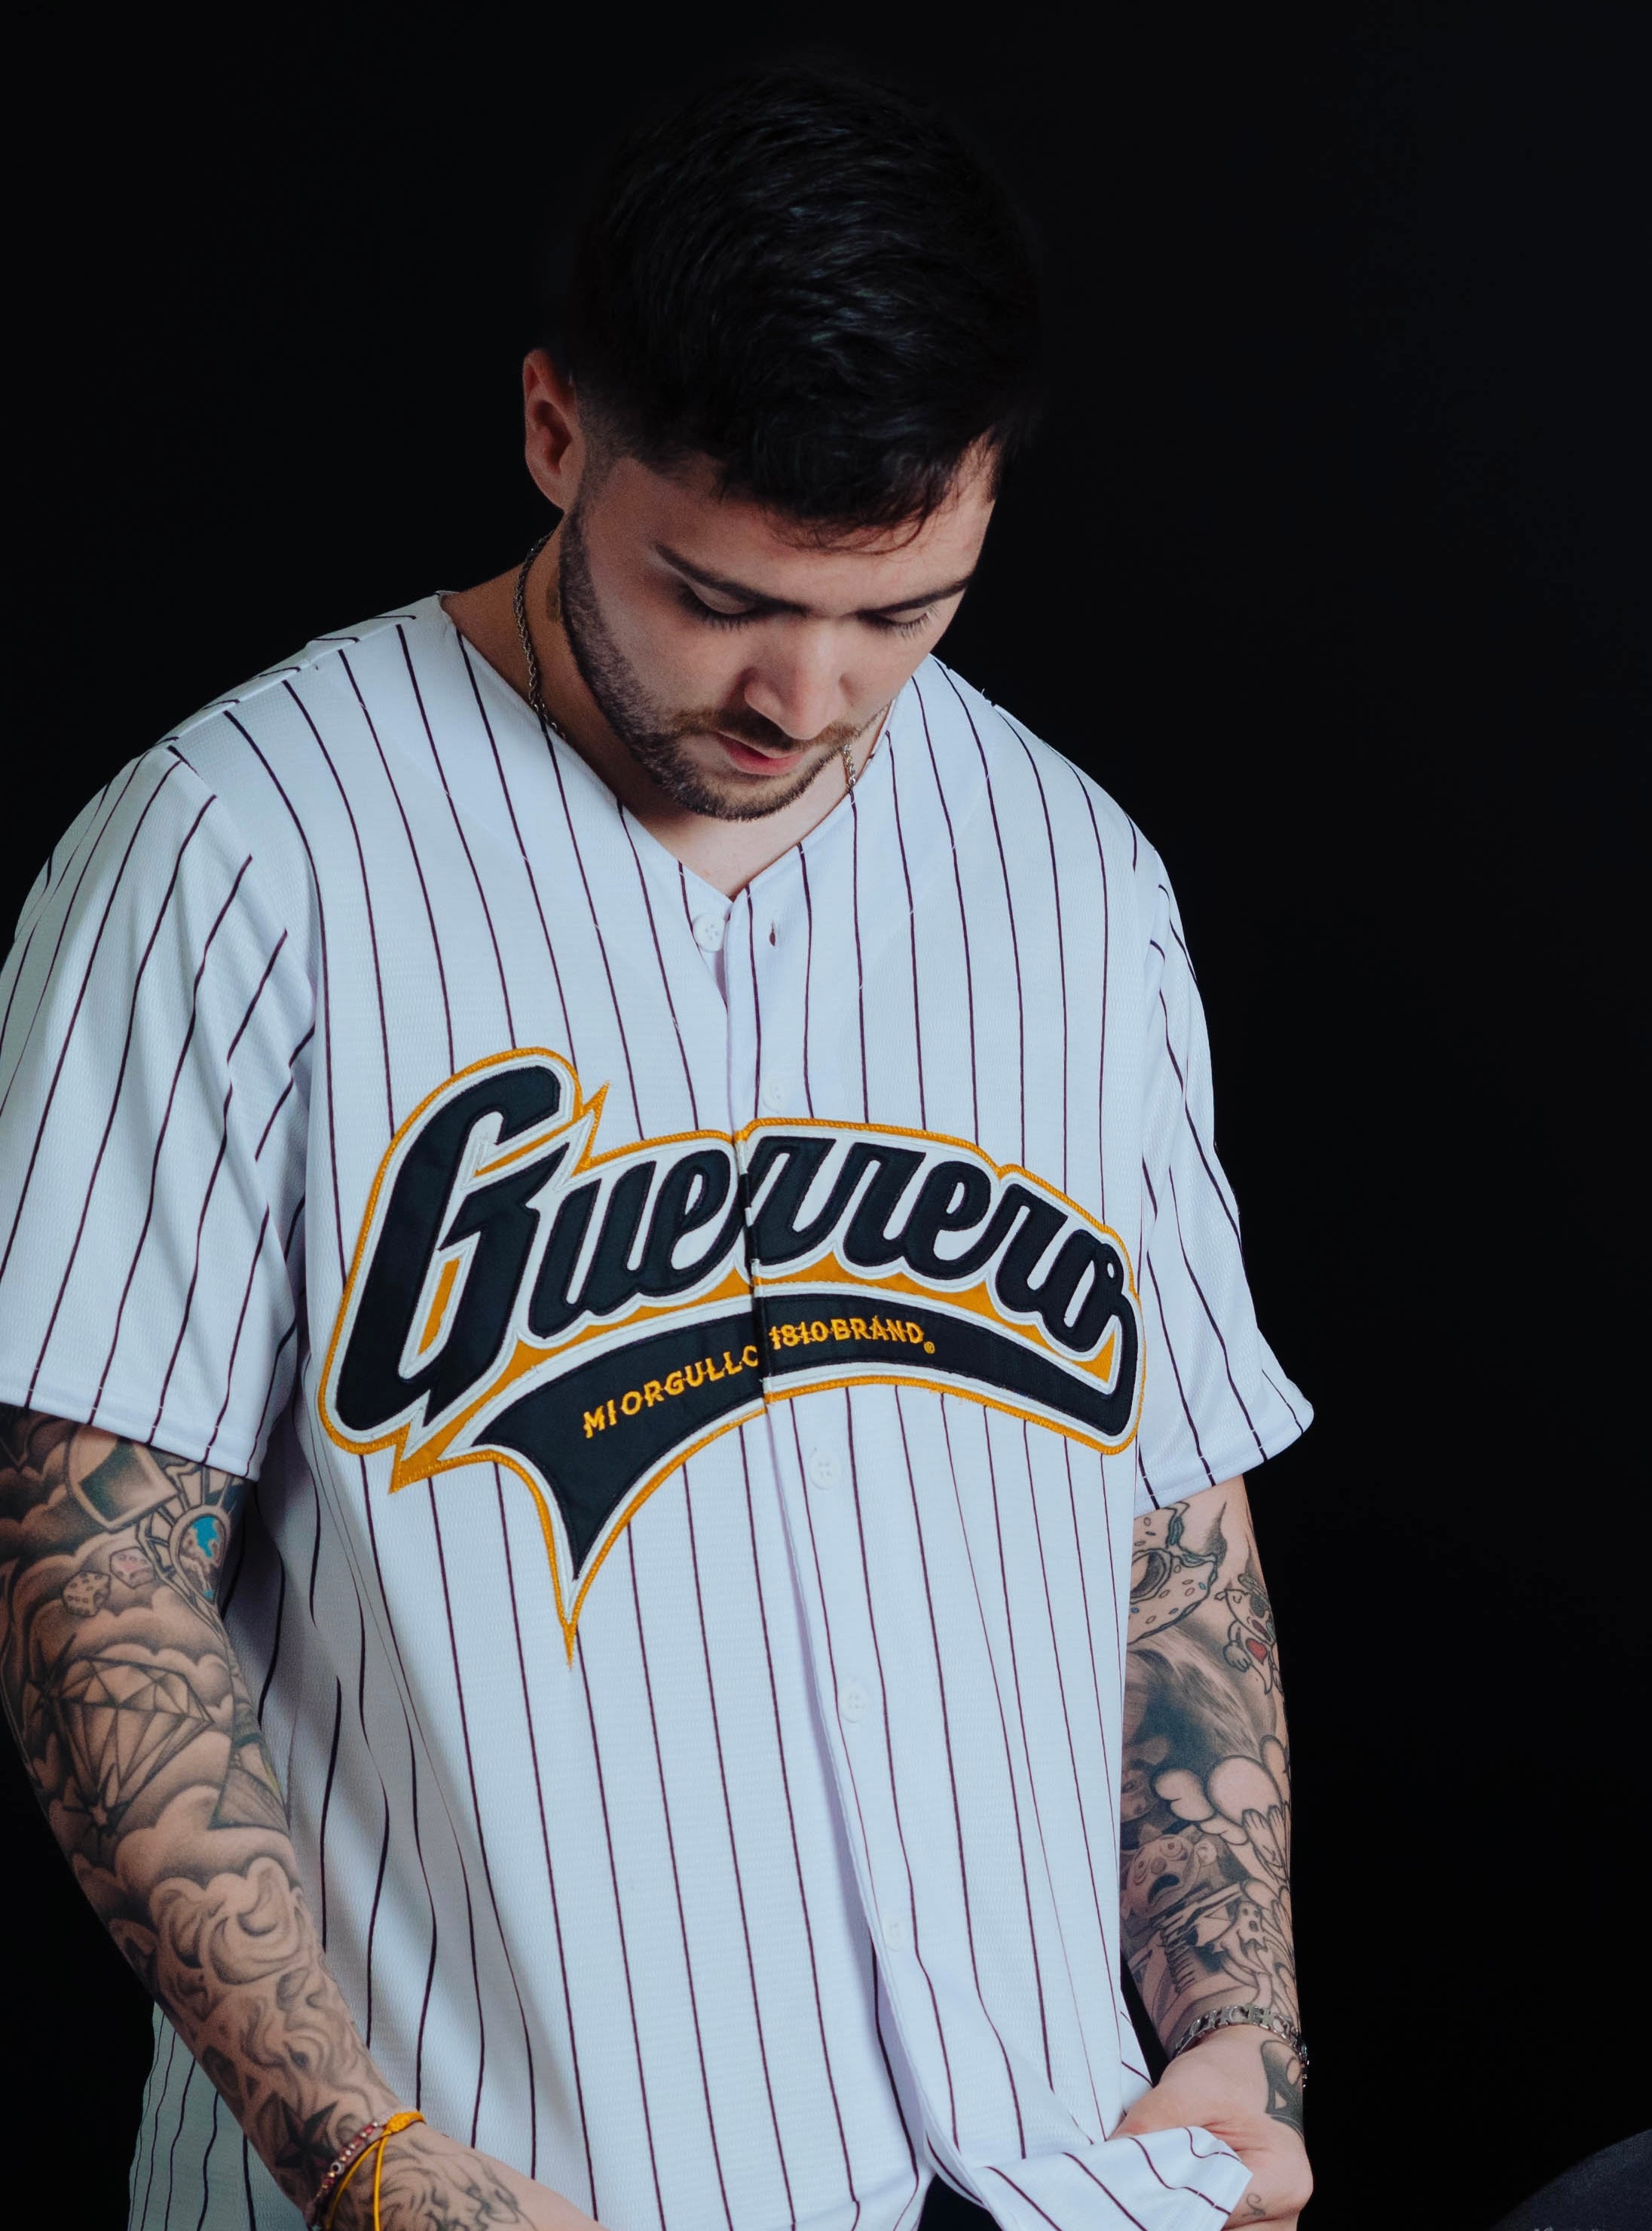 GUERRERO STRIPPED JERSEY